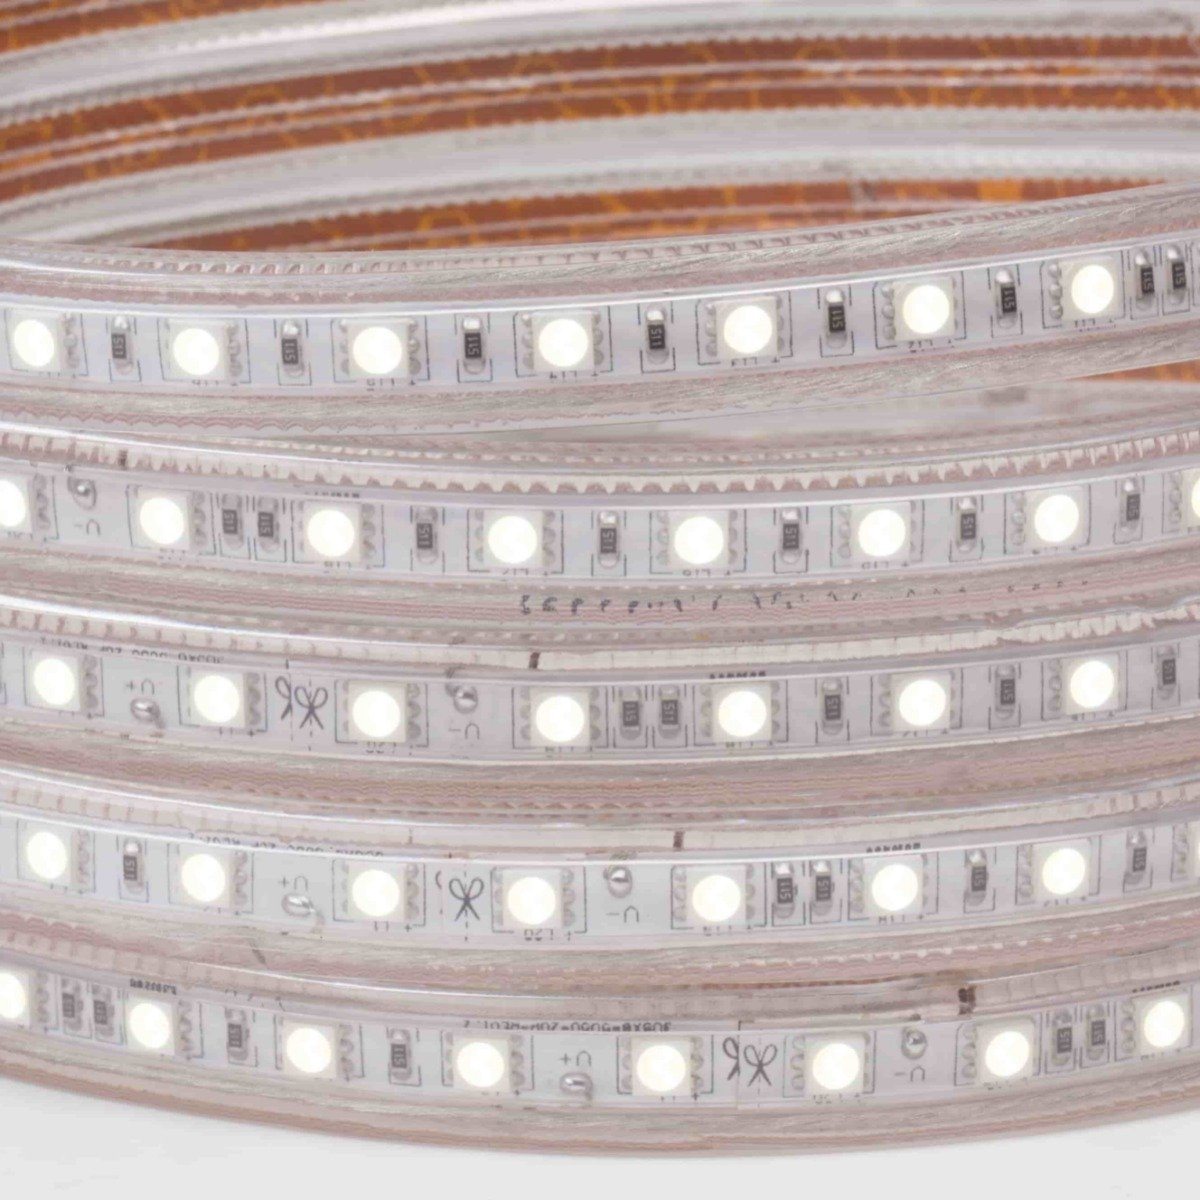 led strip light on white background coiled five times with illuminated white color led chips